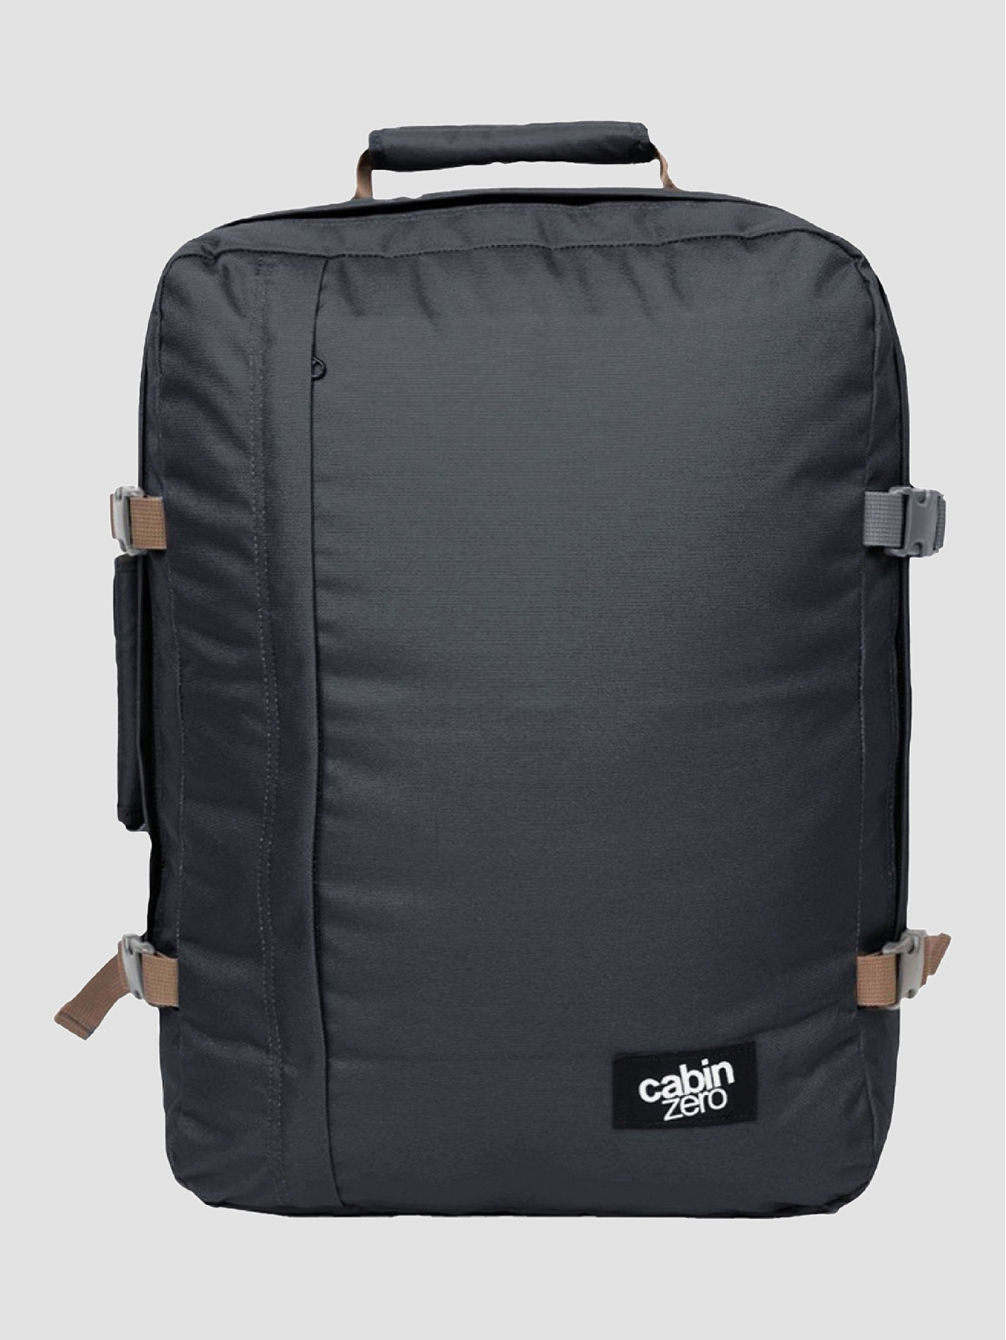 Classic ULtra Light Cabin 44L Sac &agrave; dos